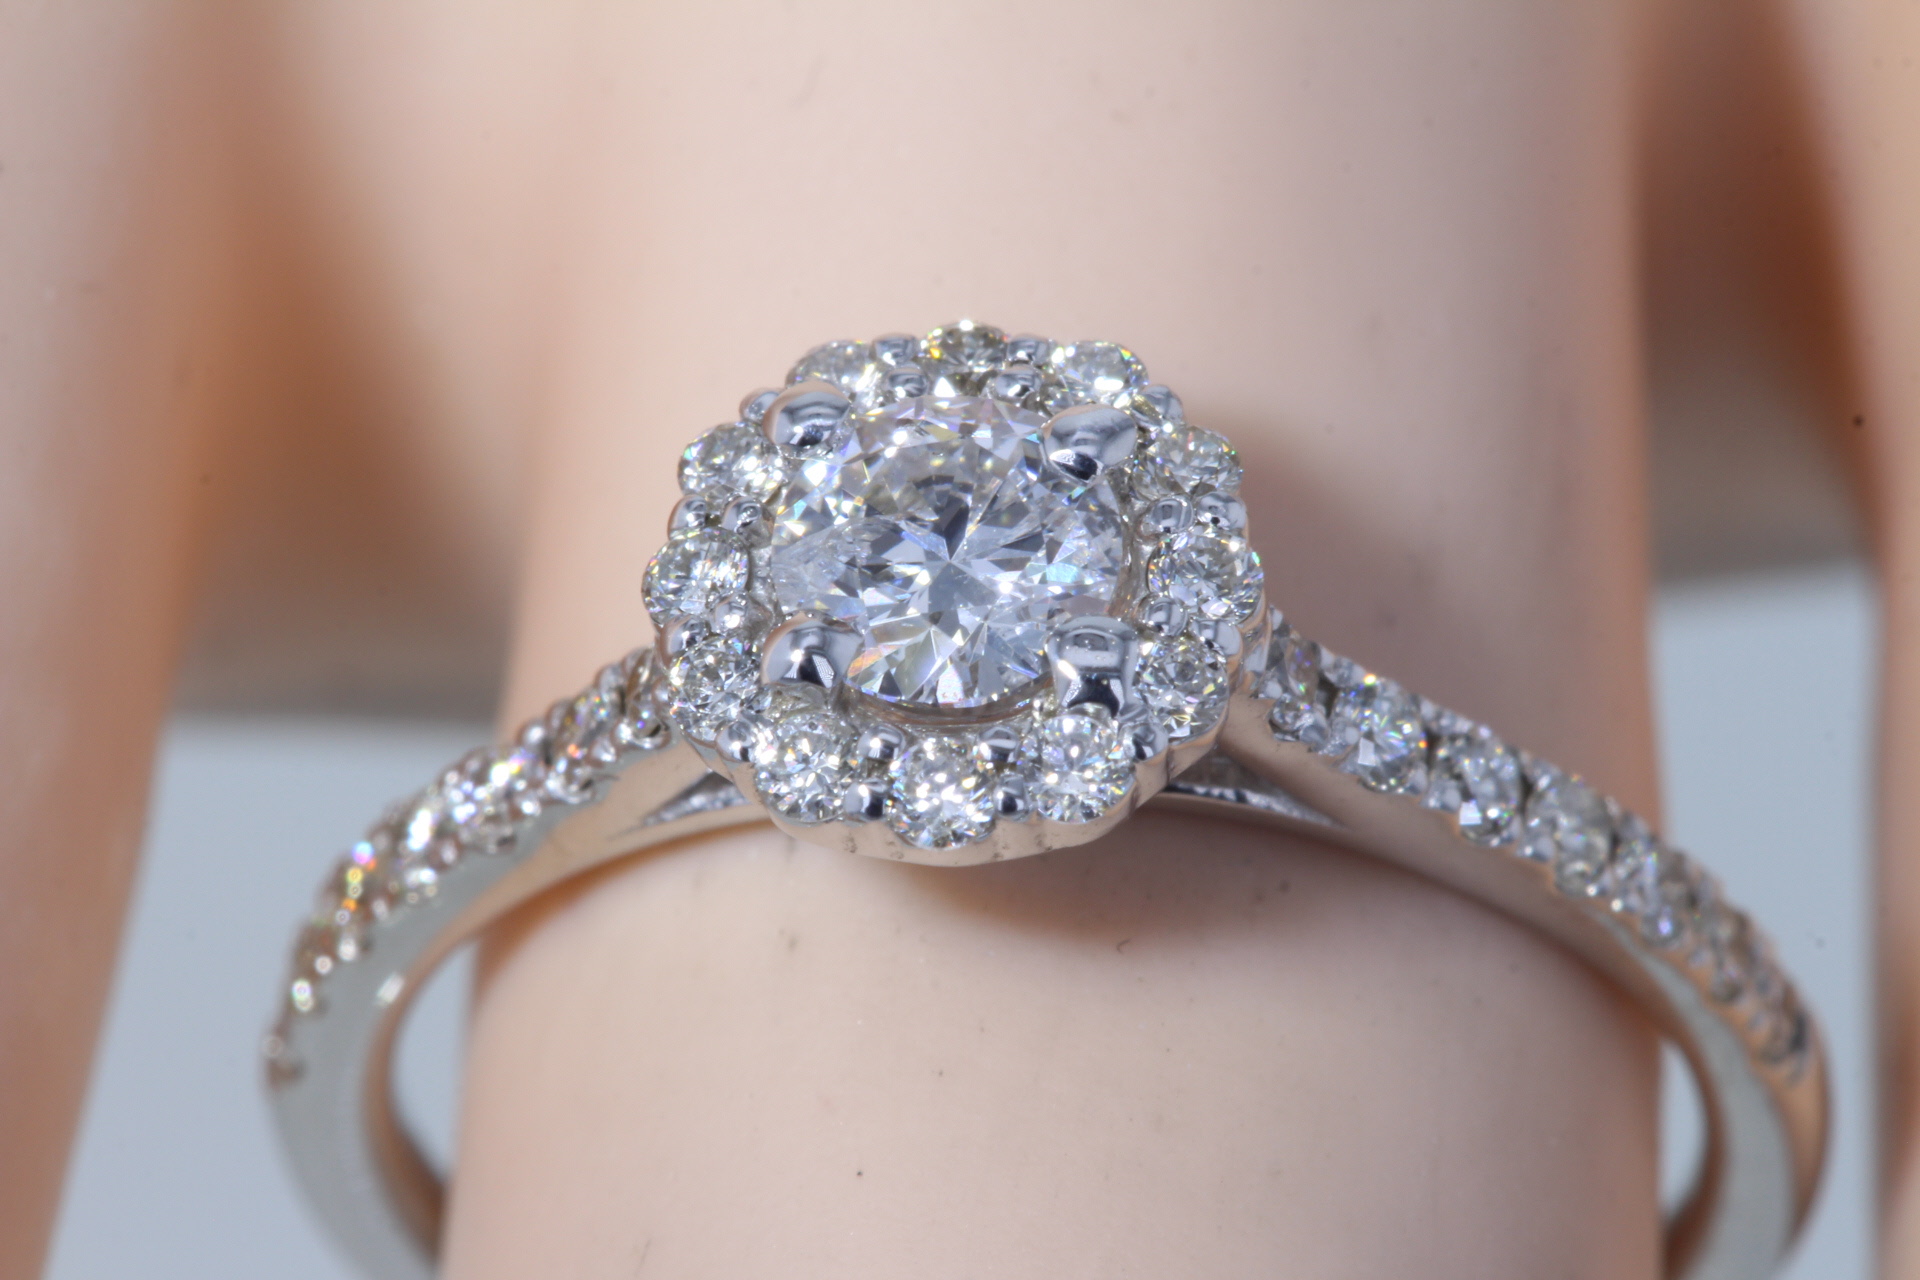 Gorgeous Certified 4.09 ct Diamond Halo Engagement Ring